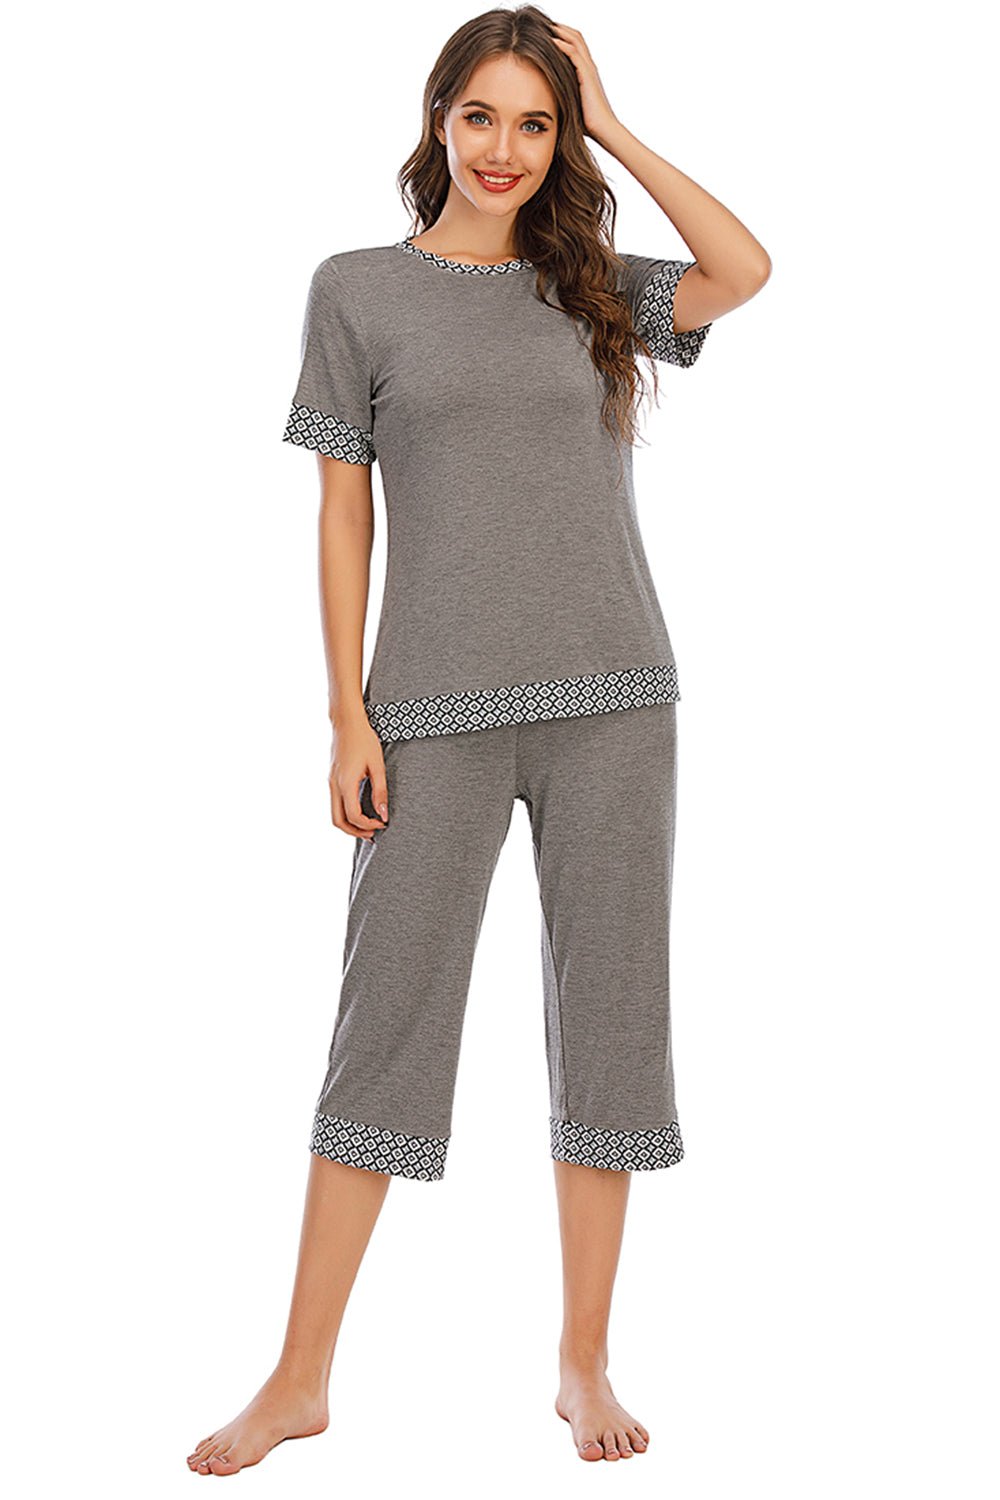 Round Neck Short Sleeve Top and Capris Pants Lounge Set - OMG! Rose